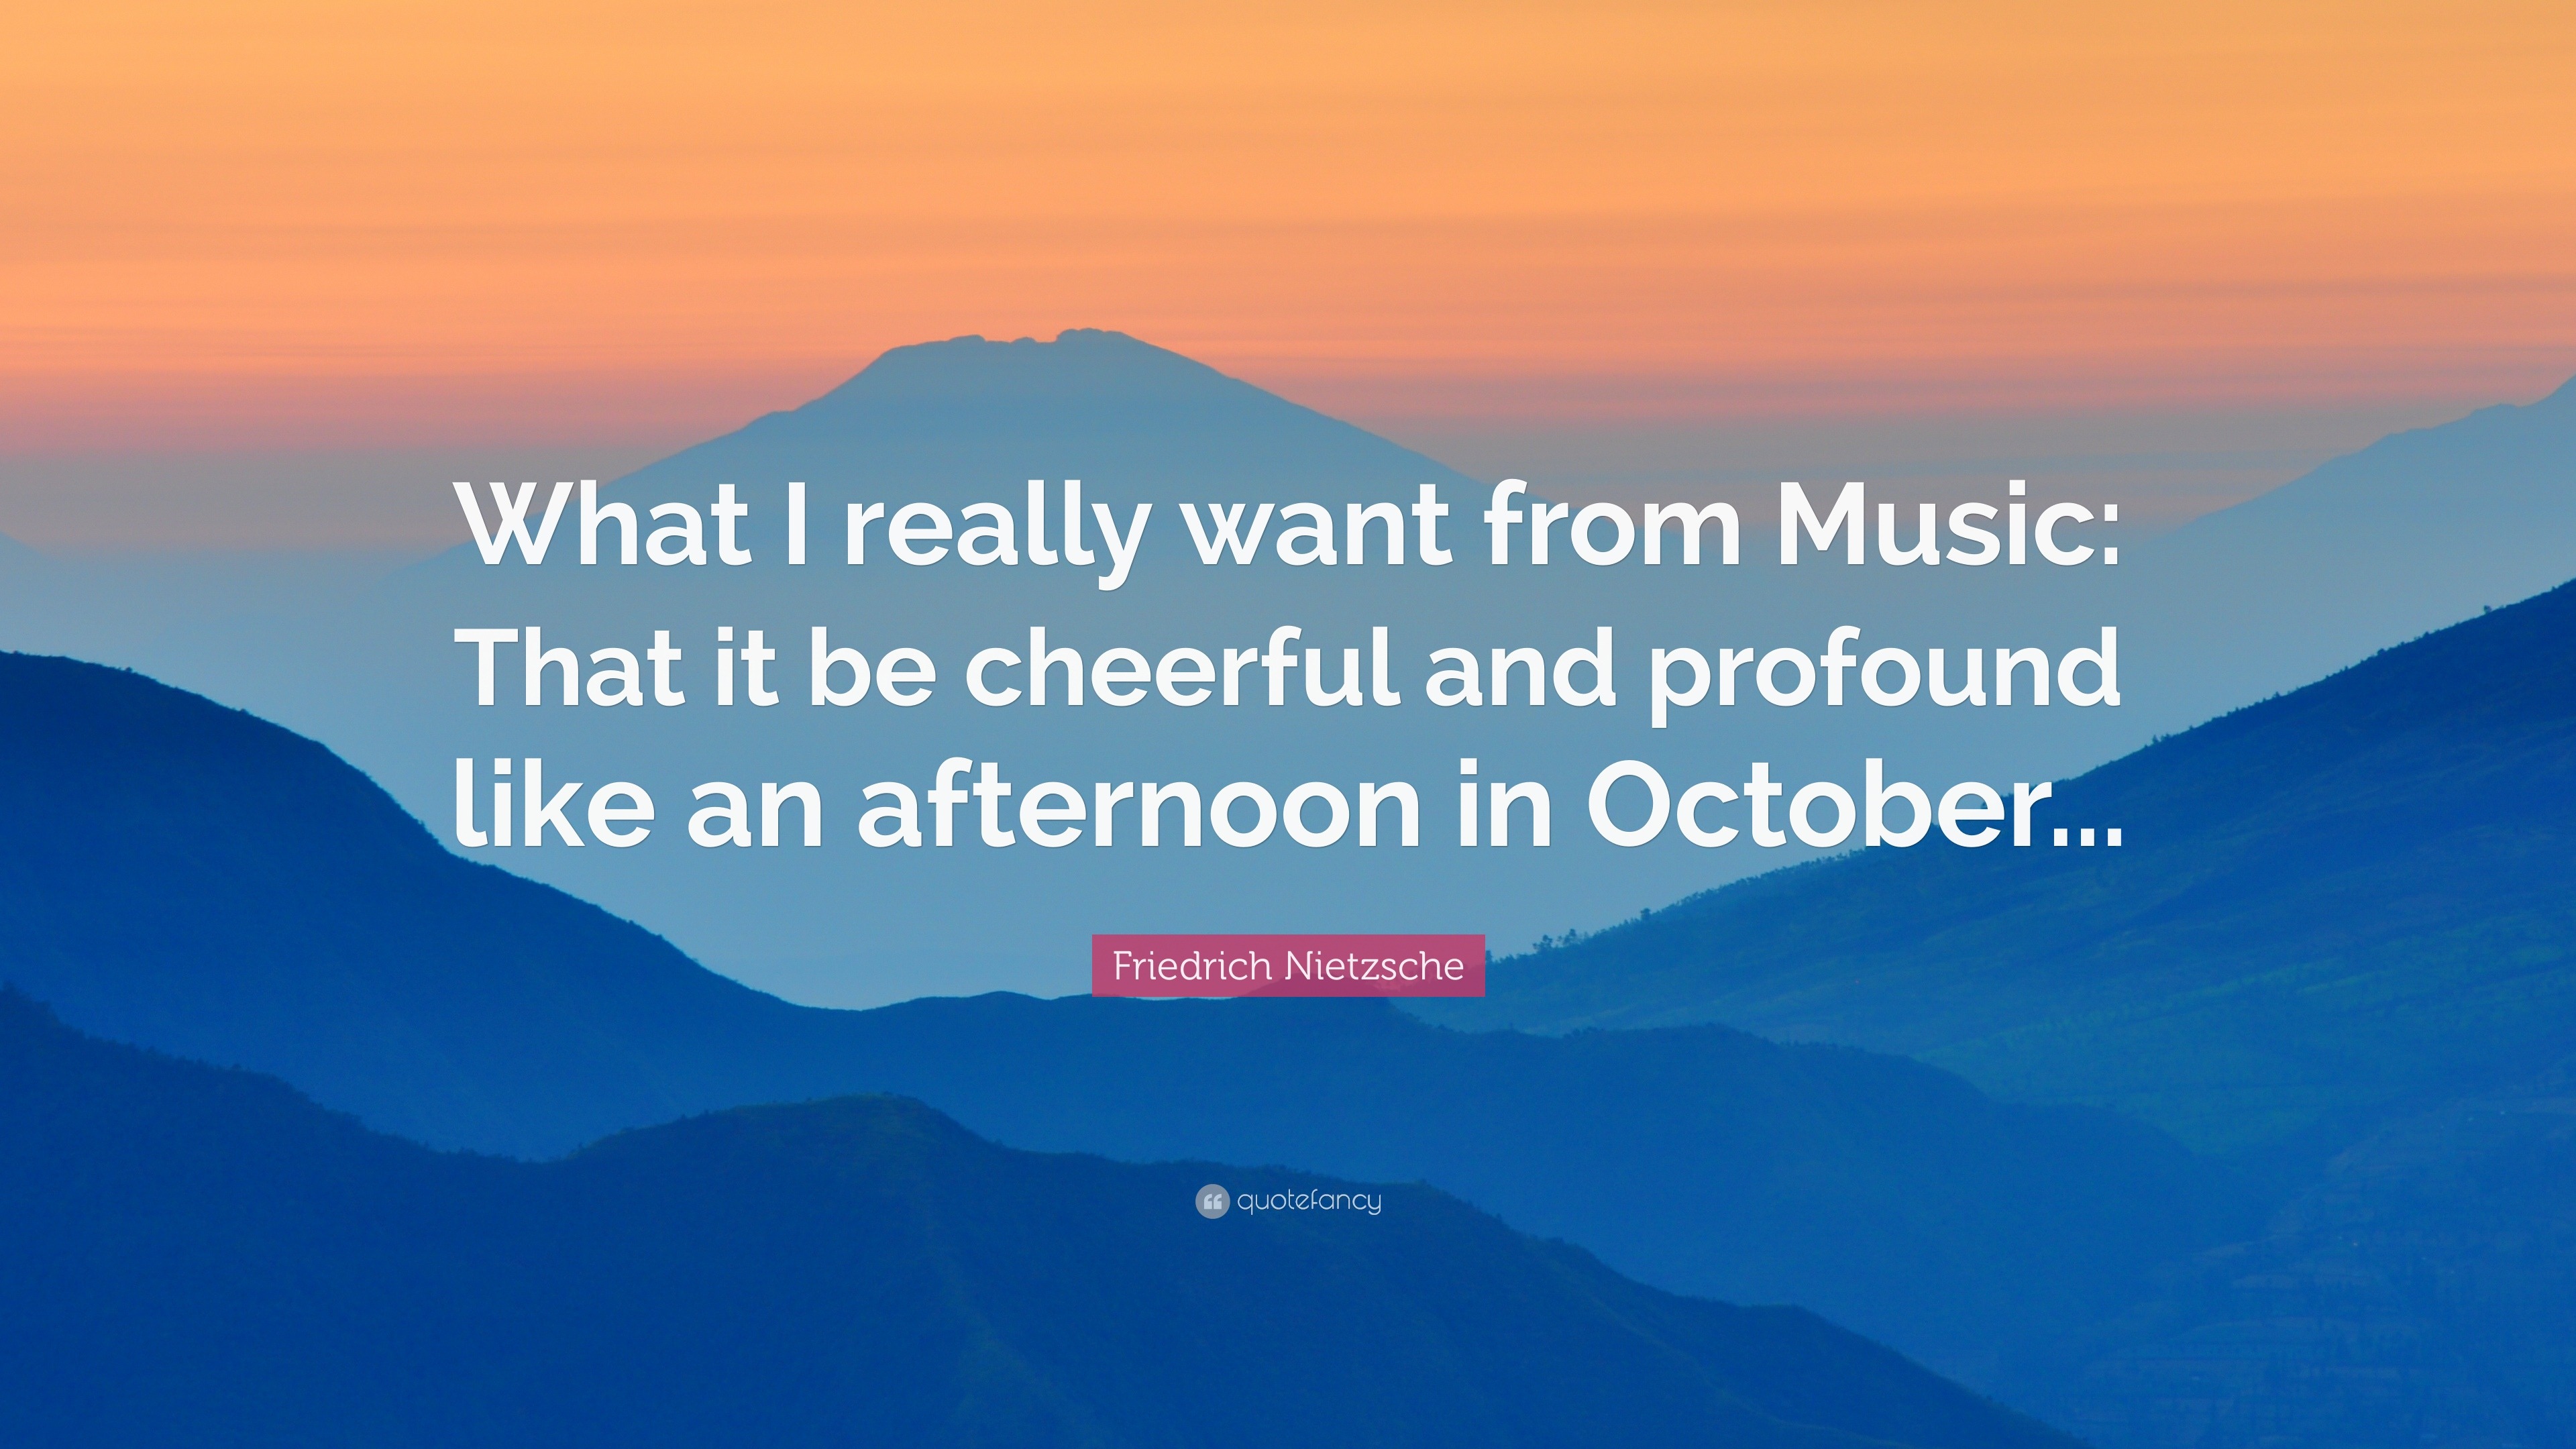 Friedrich Nietzsche Quote What I Really Want From Music That It Be Cheerful And Profound Like